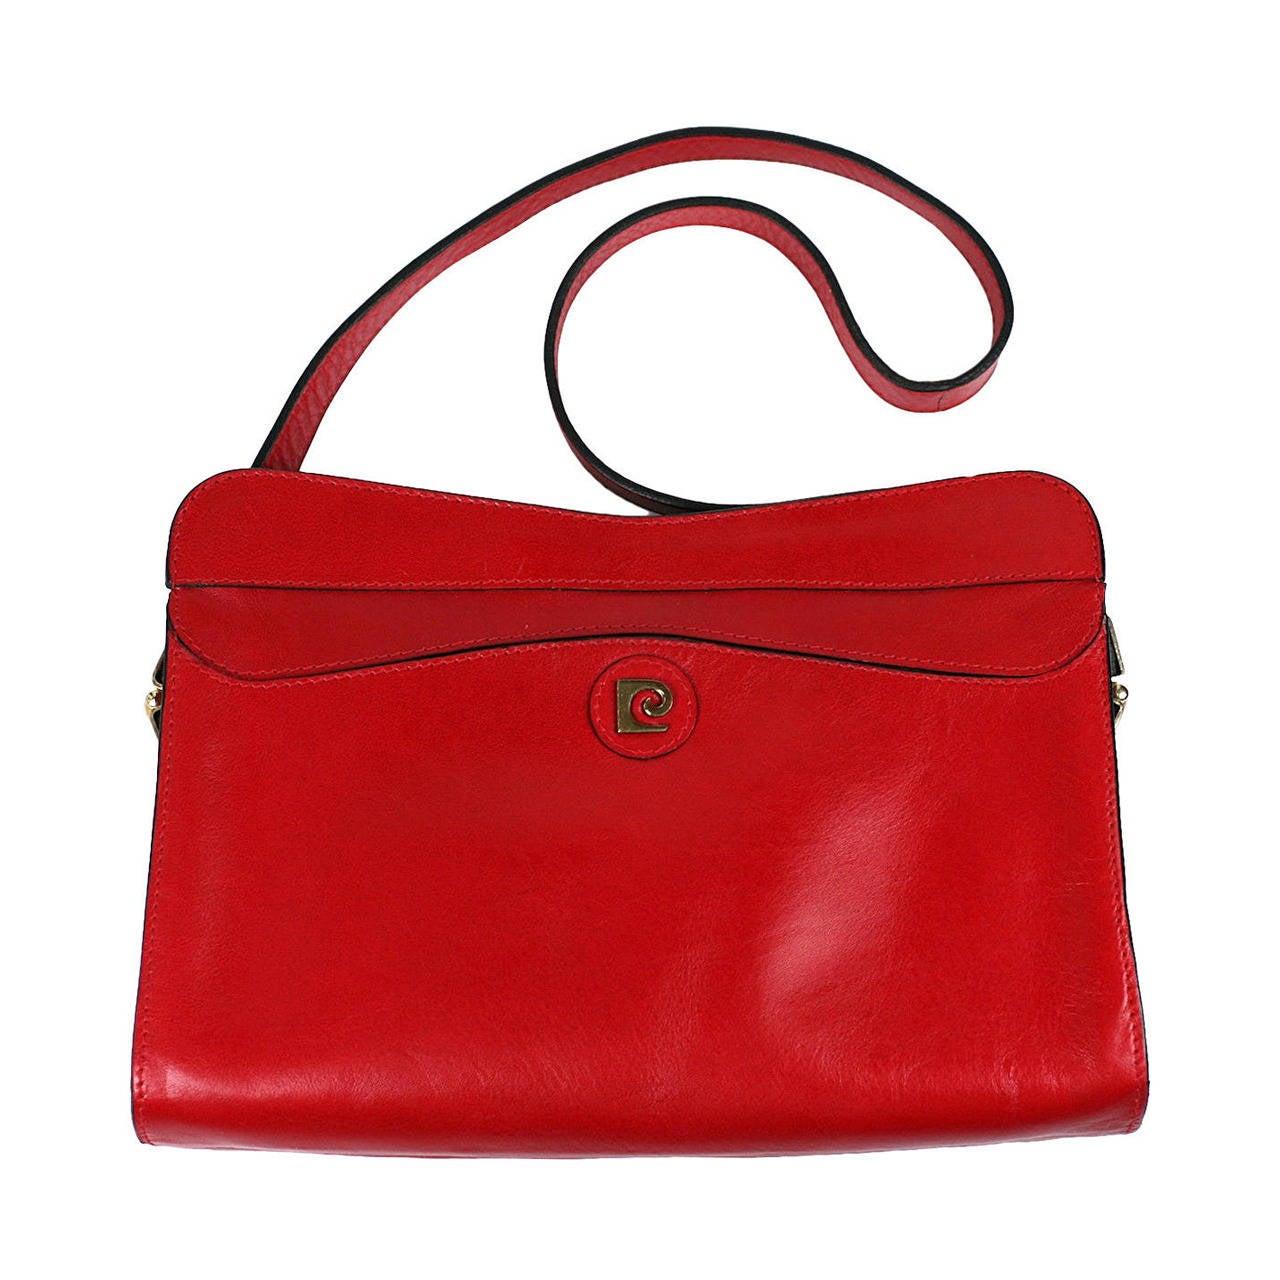 Are Pierre Cardin bags real leather?